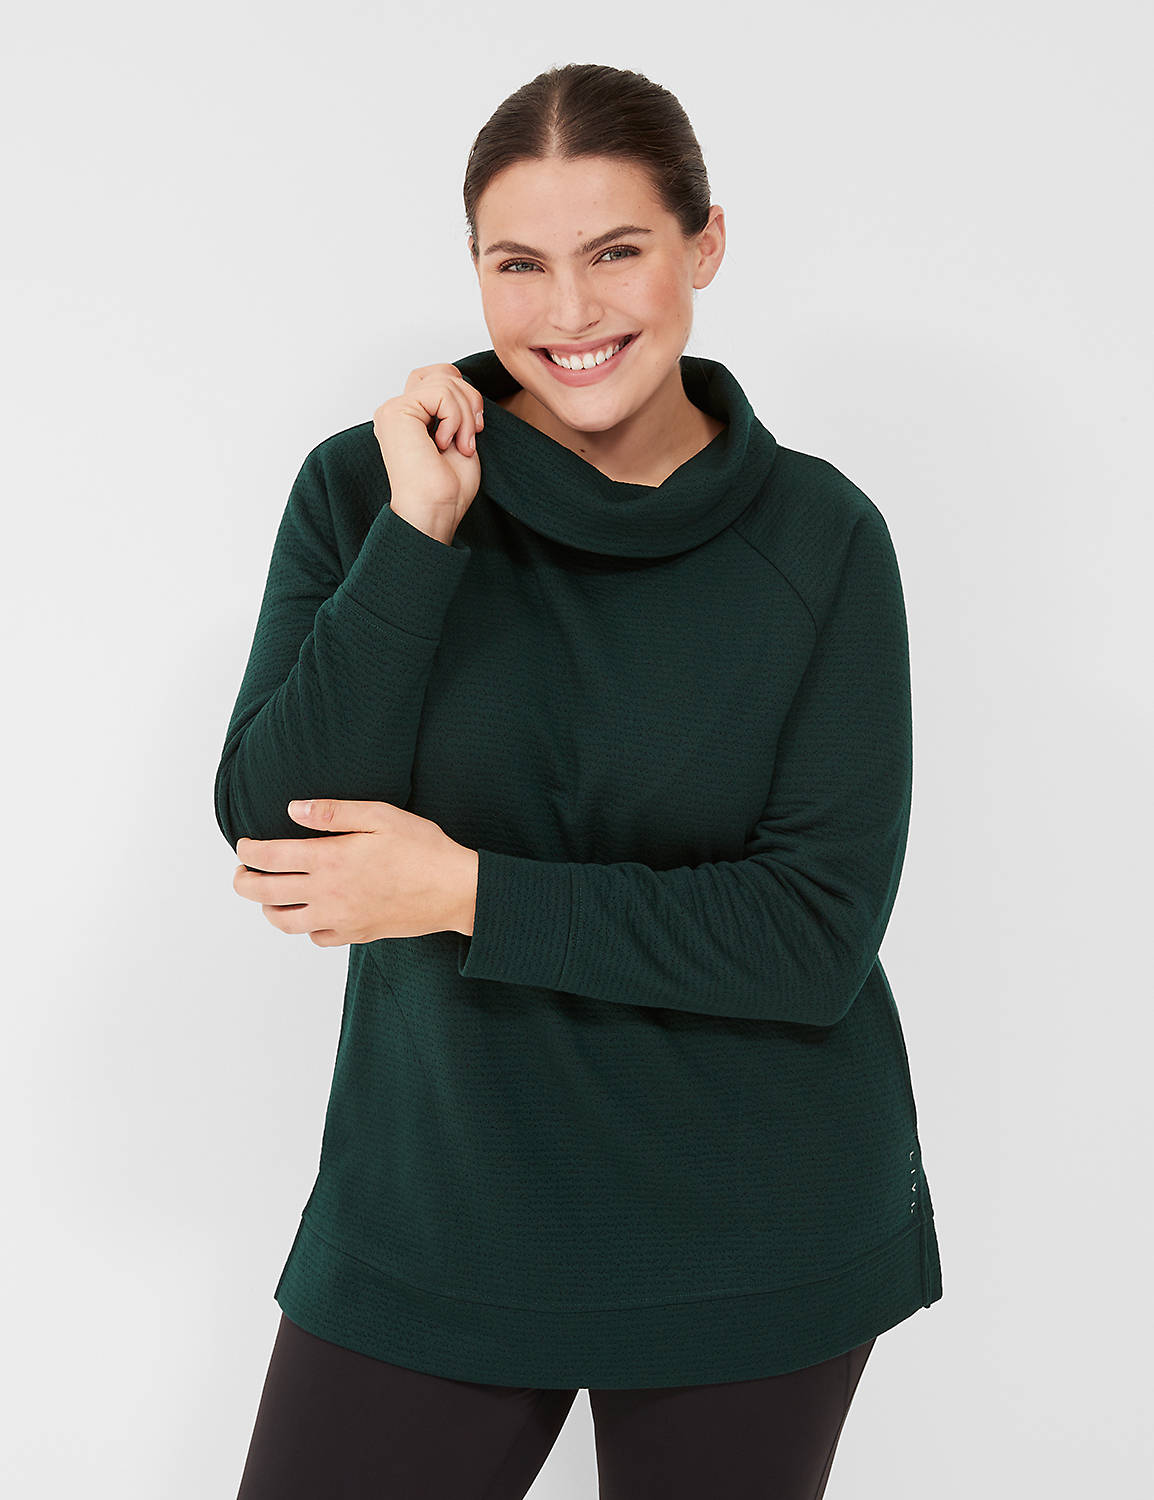 LIVI Long Sleeve Cowl Neck Textured Product Image 1